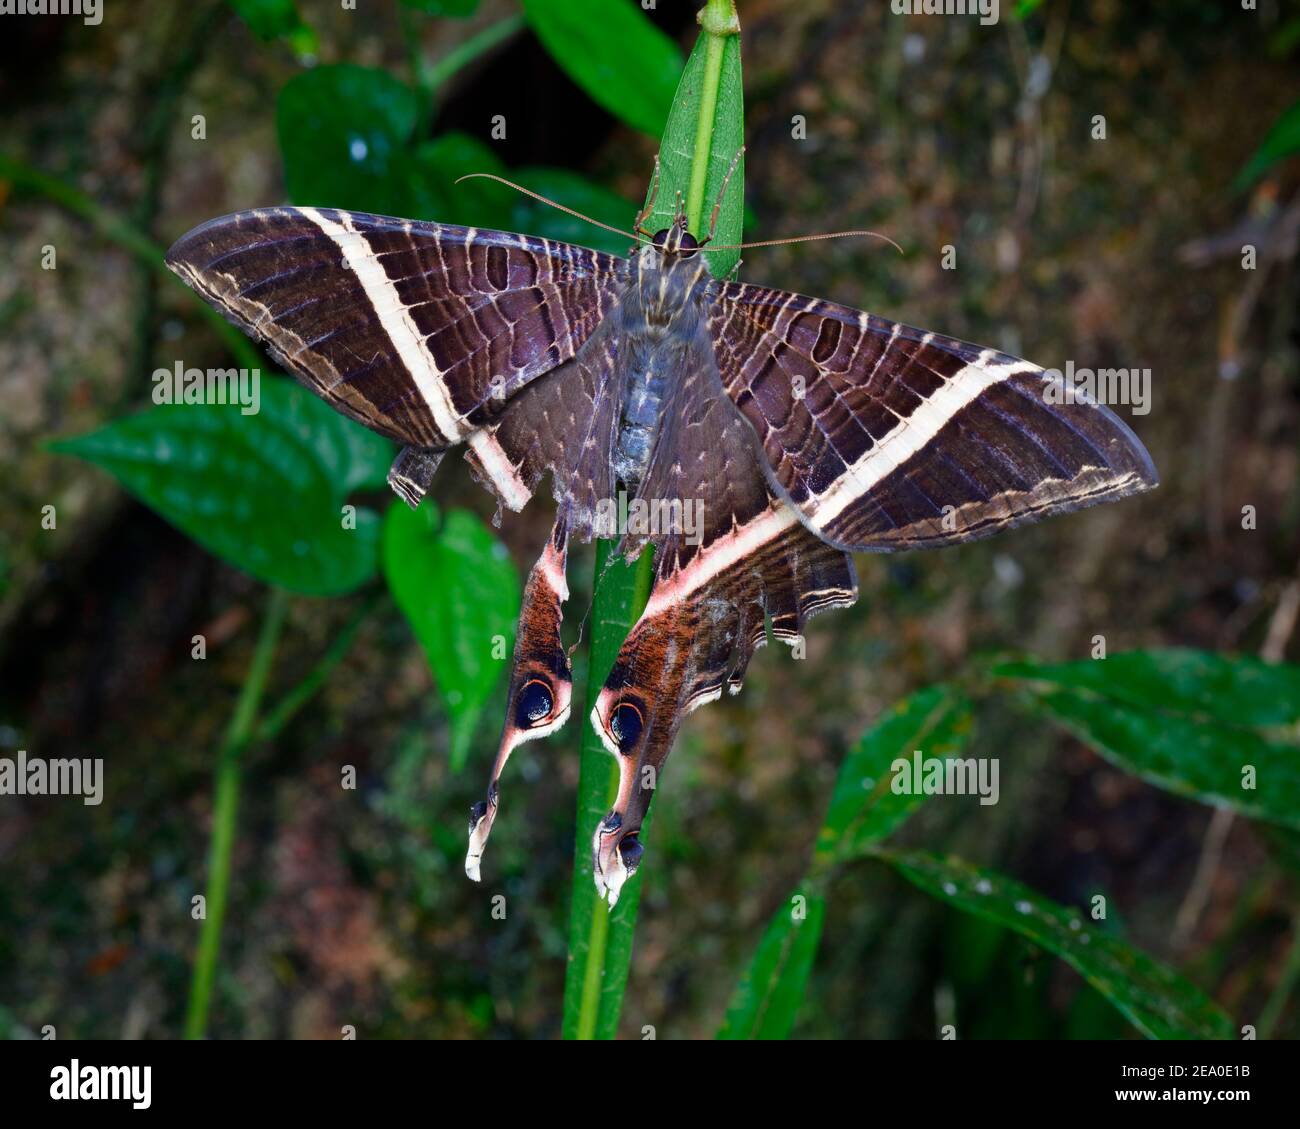 A large tailed moth, Sematuridae, clinging to a plant in the rain forest under story. Stock Photo